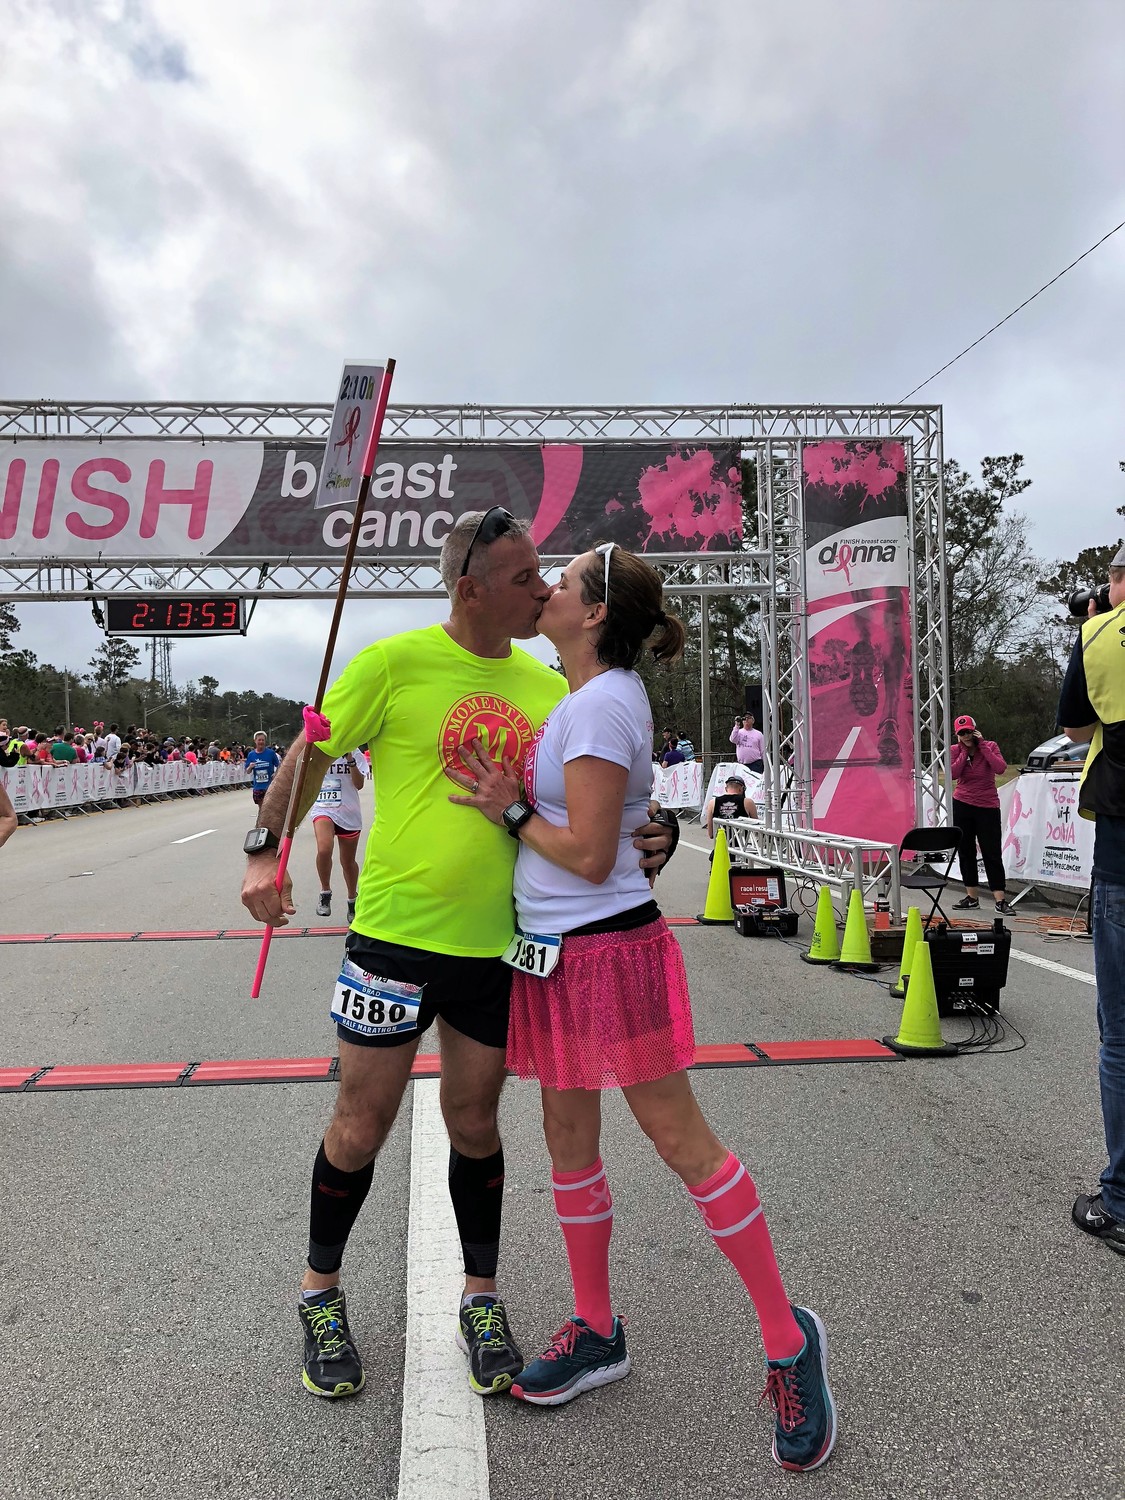 A couple shares a congratulatory kiss after crossing the finish line.